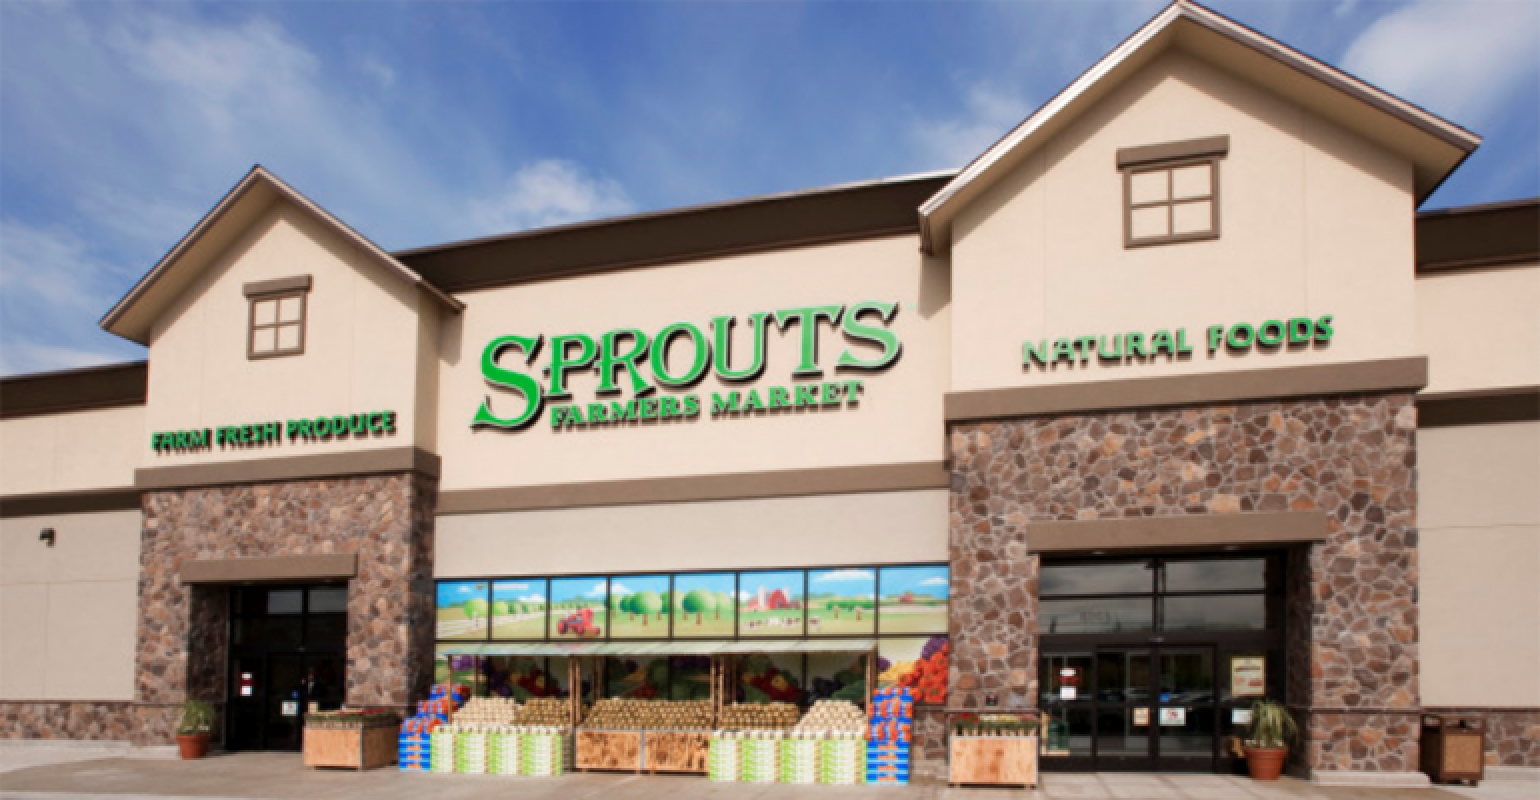 Sprouts Farmers Market to Expand Grocery Pickup Offering Nationally  Starting with LA and Central California Stores - Sprouts Corporate: About,  Sustainability, Press, Careers, Foundation, Investors